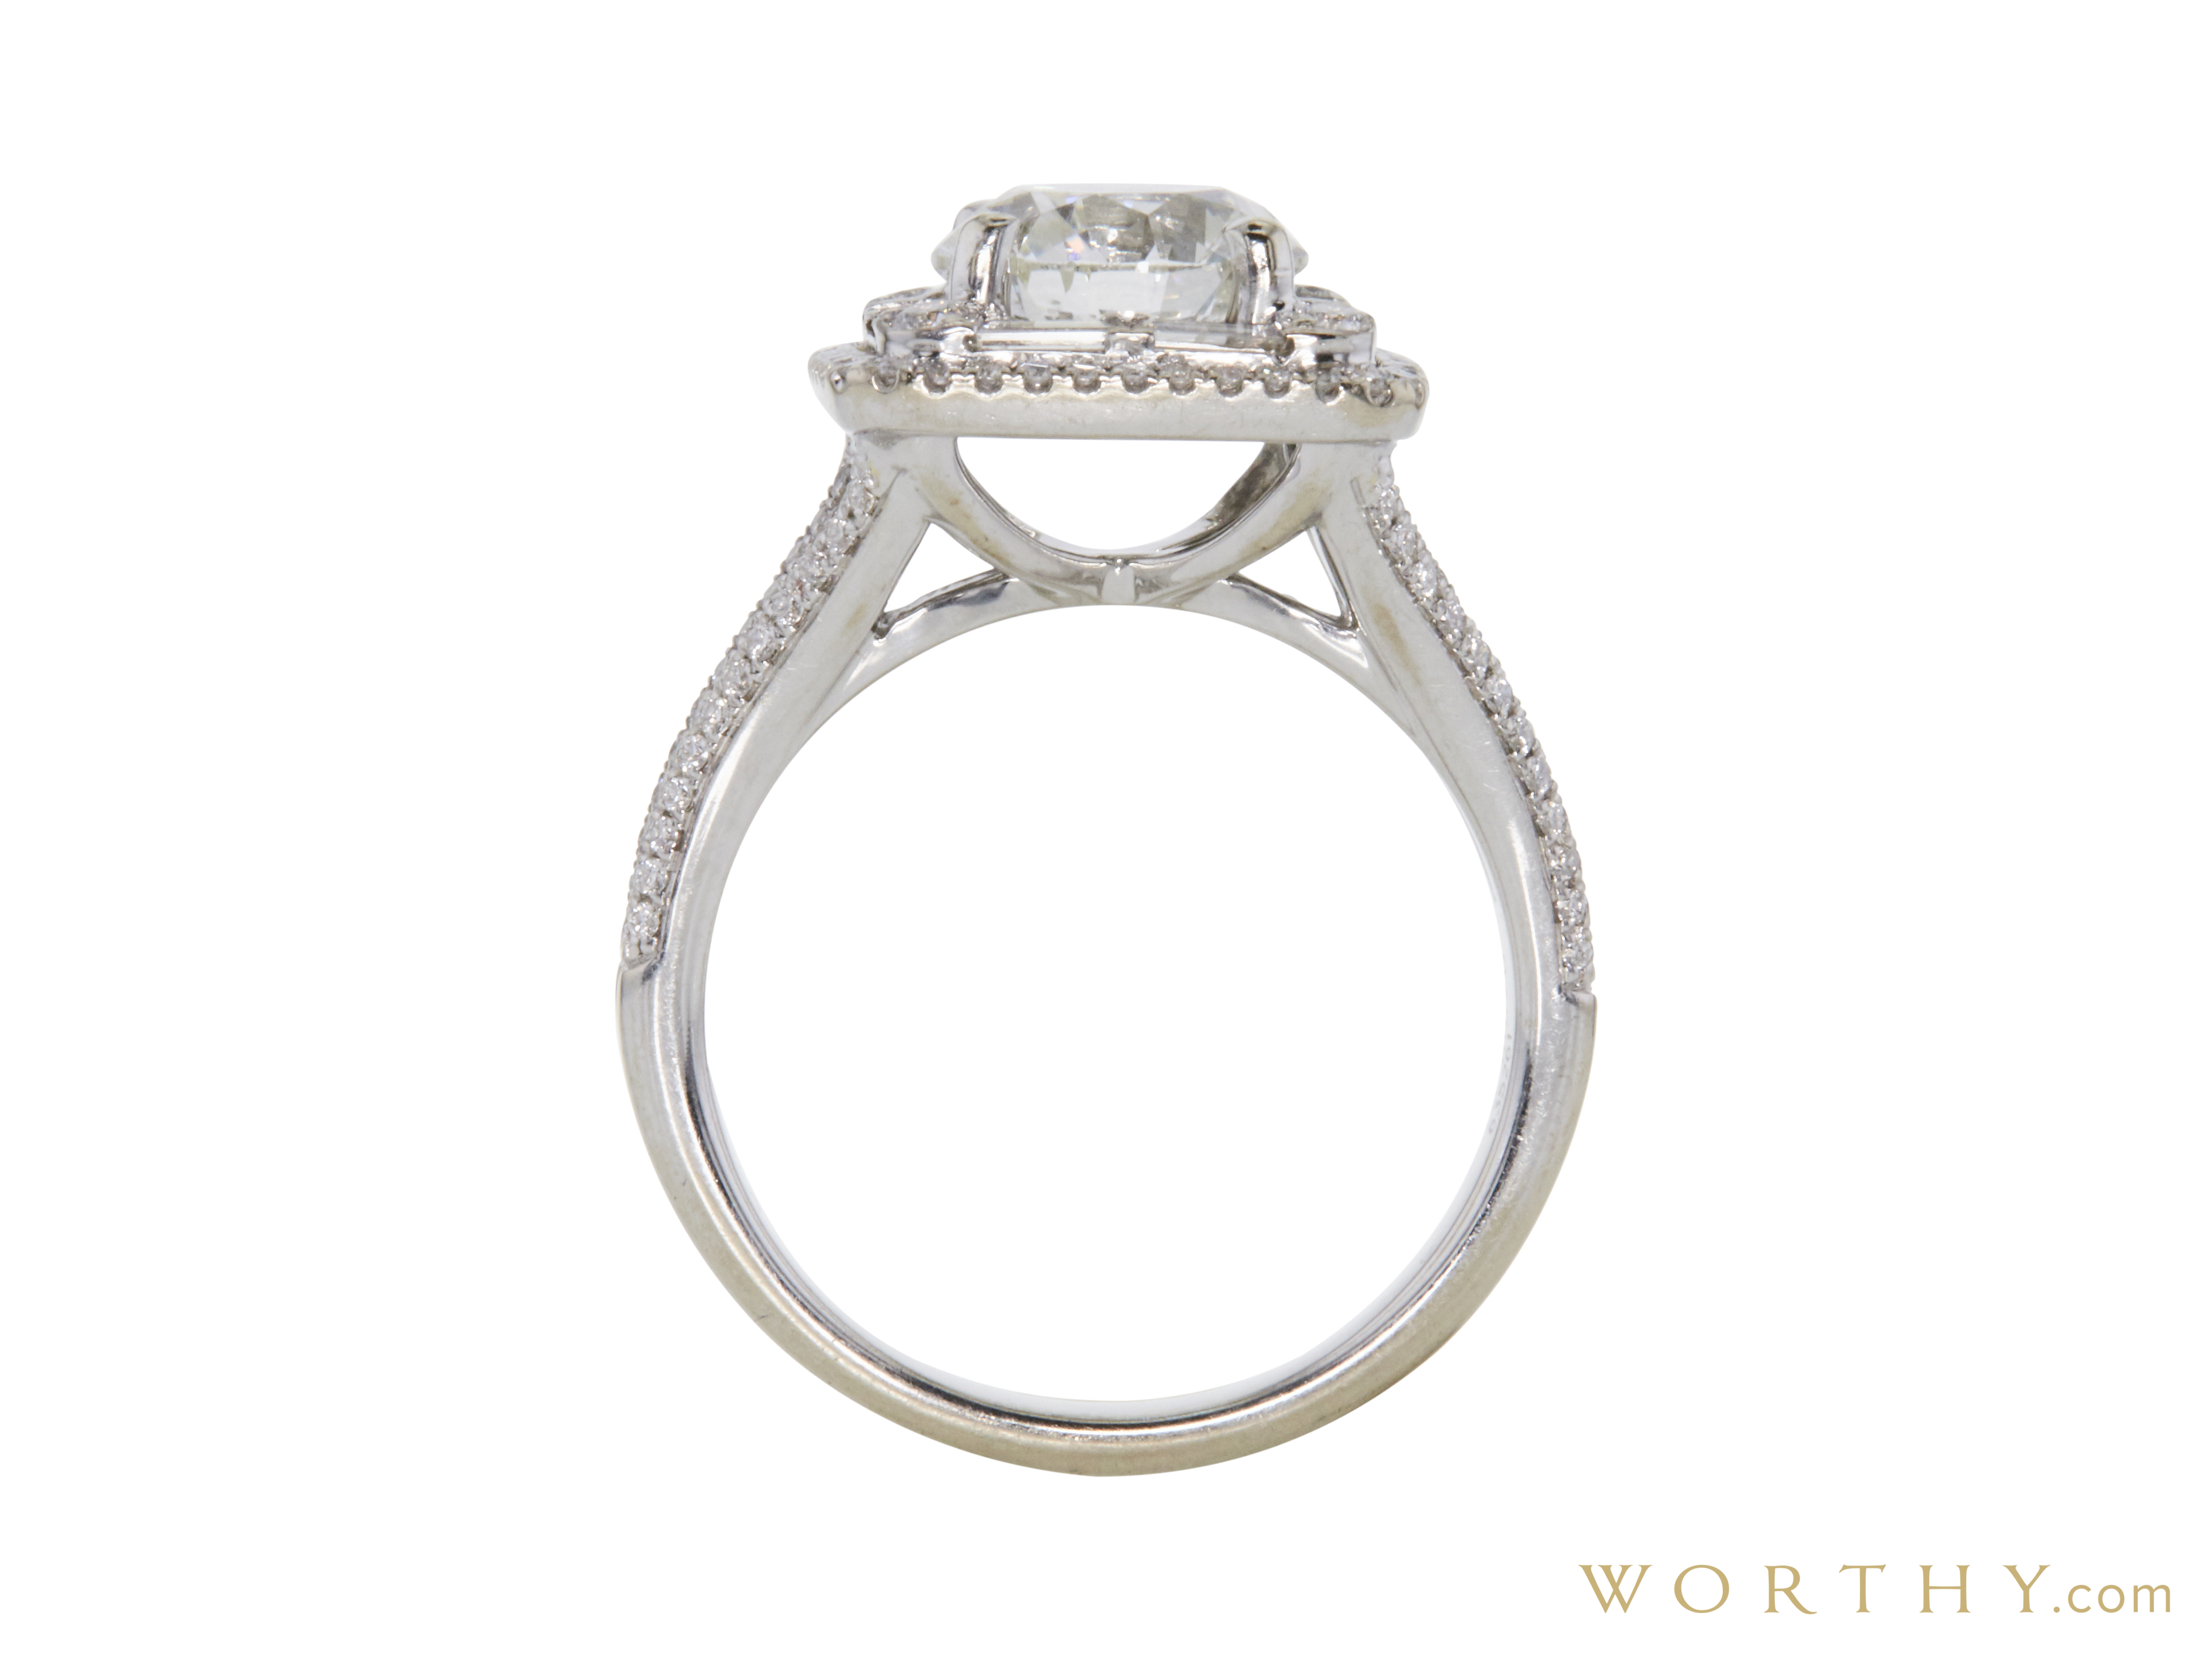 2.00 ct. Round Cut Halo Ring | Sold For $15,001 | Worthy.com